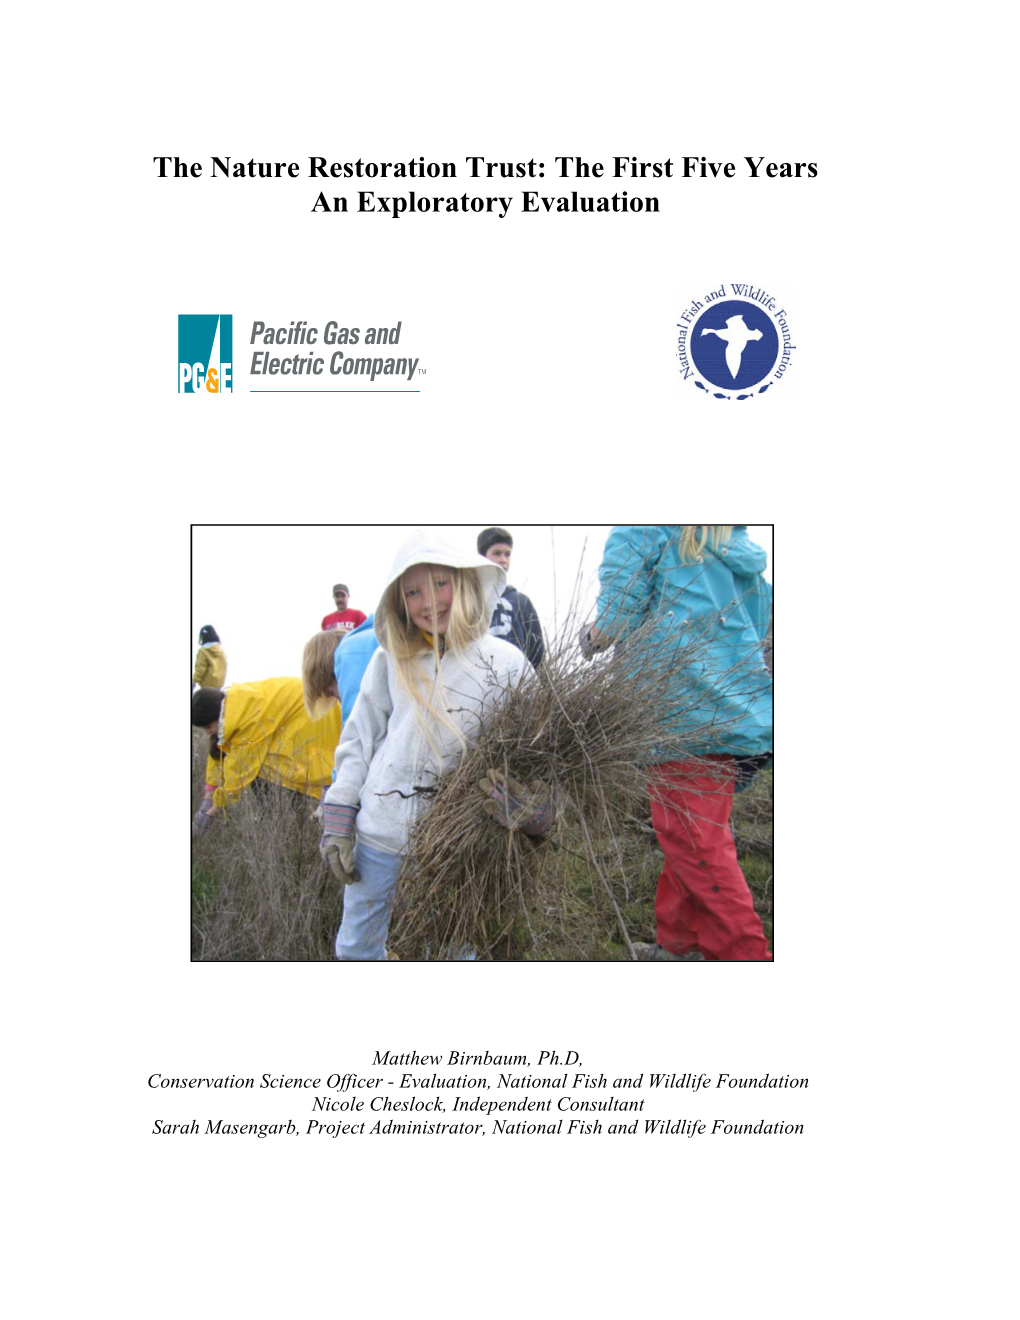 The Nature Restoration Trust: the First Five Years an Exploratory Evaluation